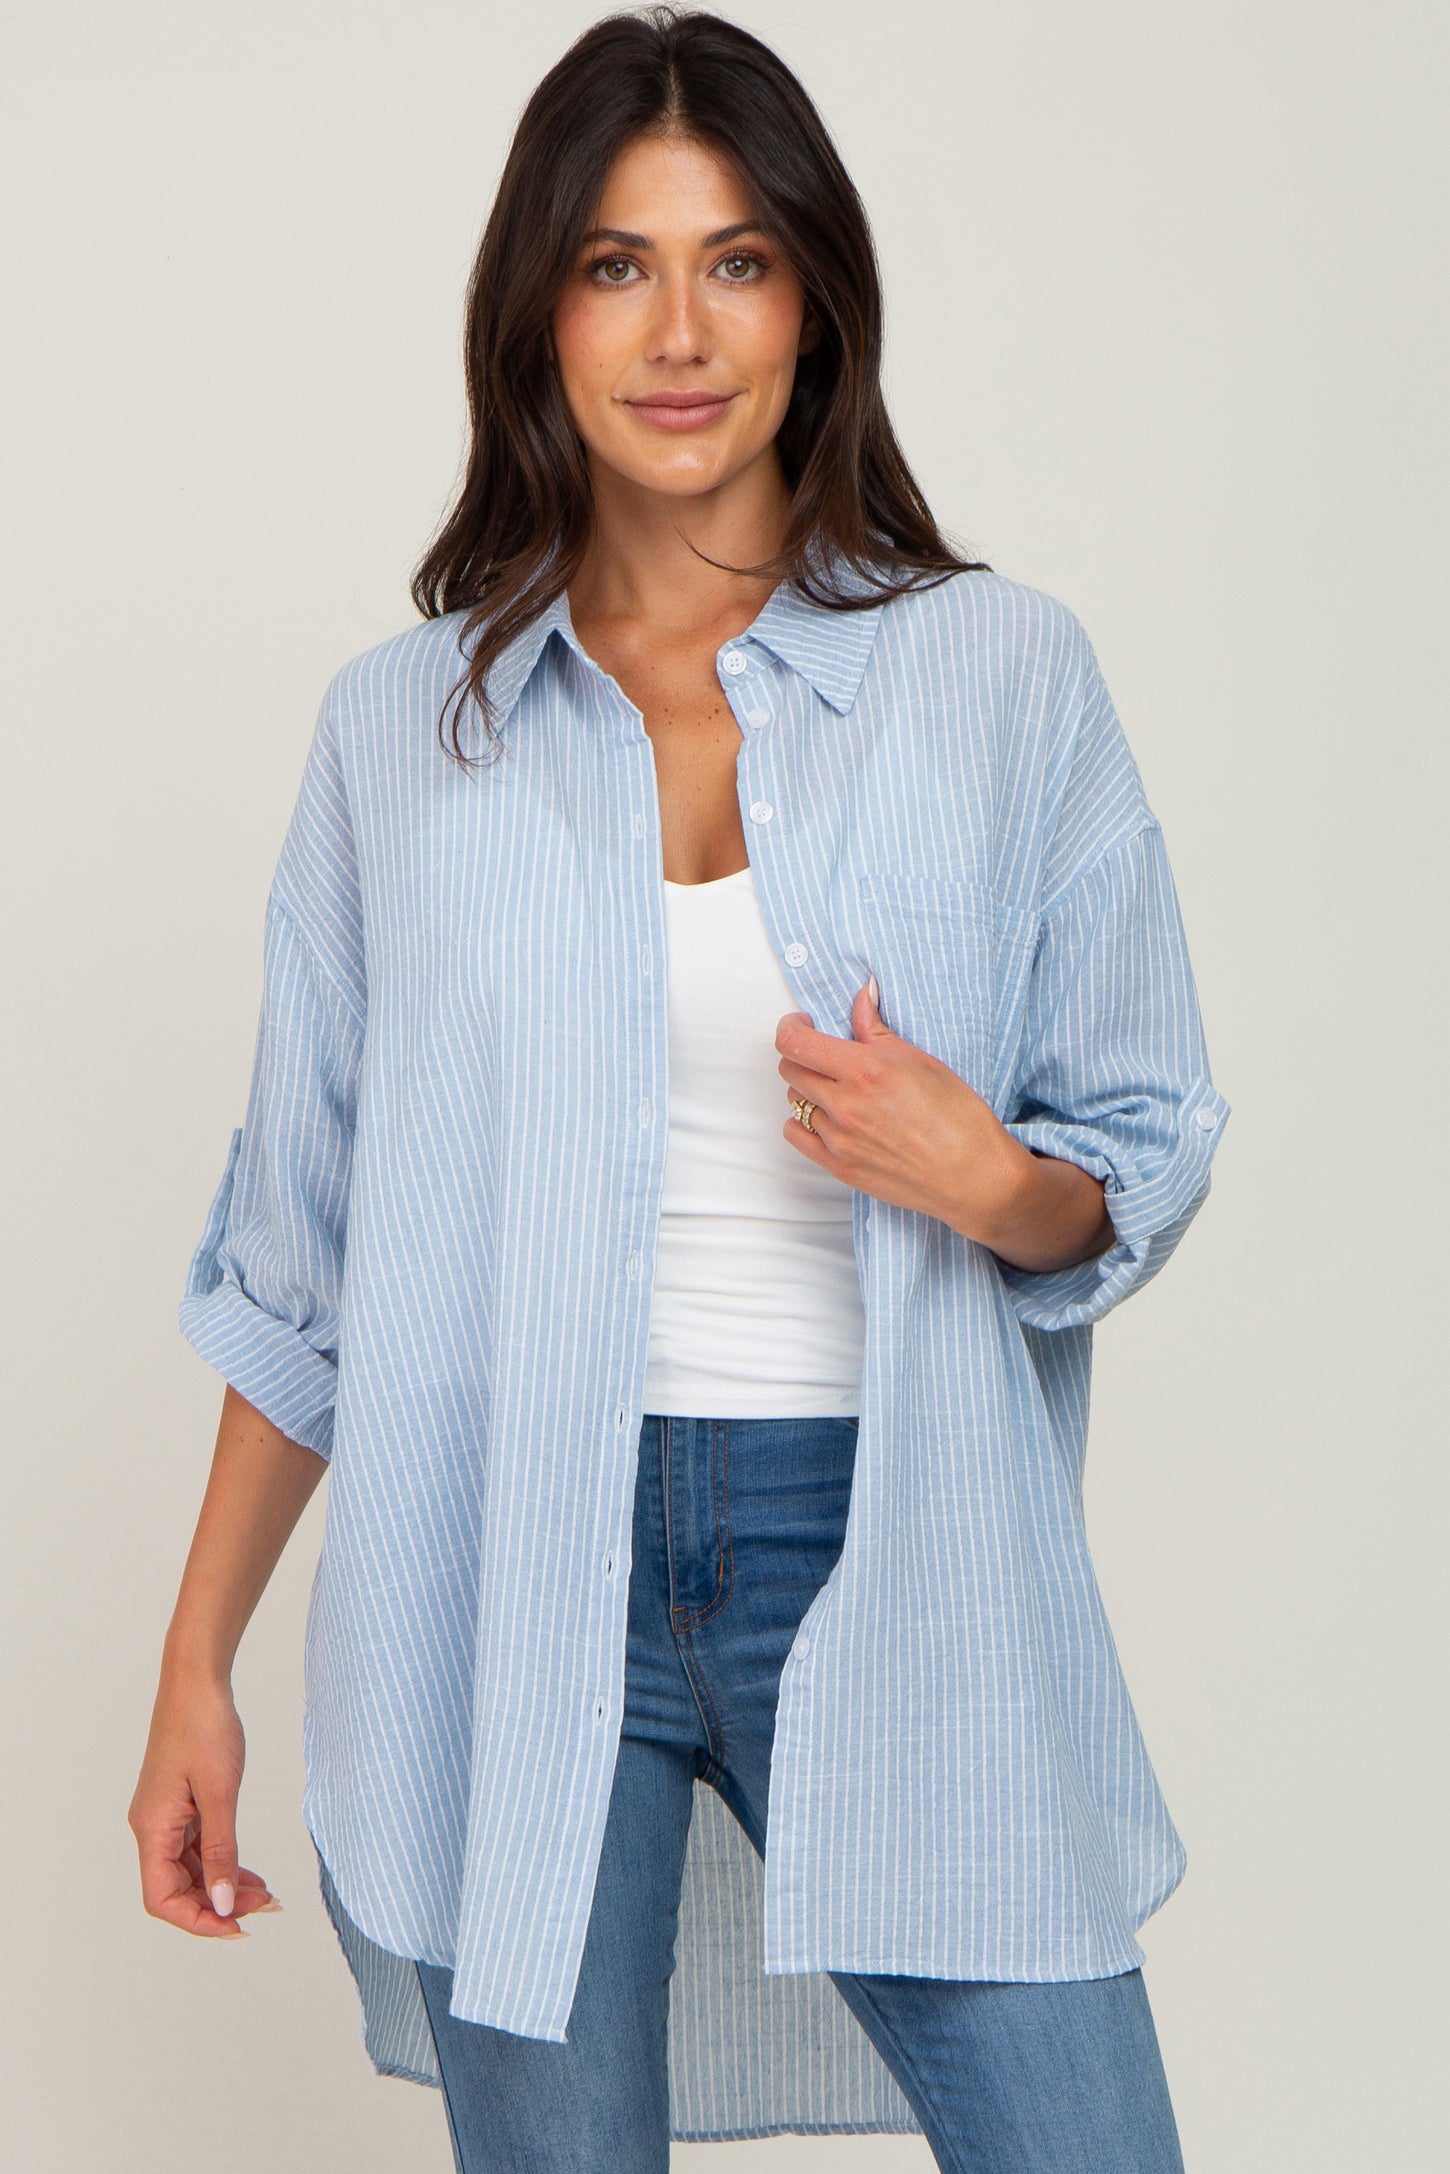 Light Blue Pinstriped Button Up Maternity Top